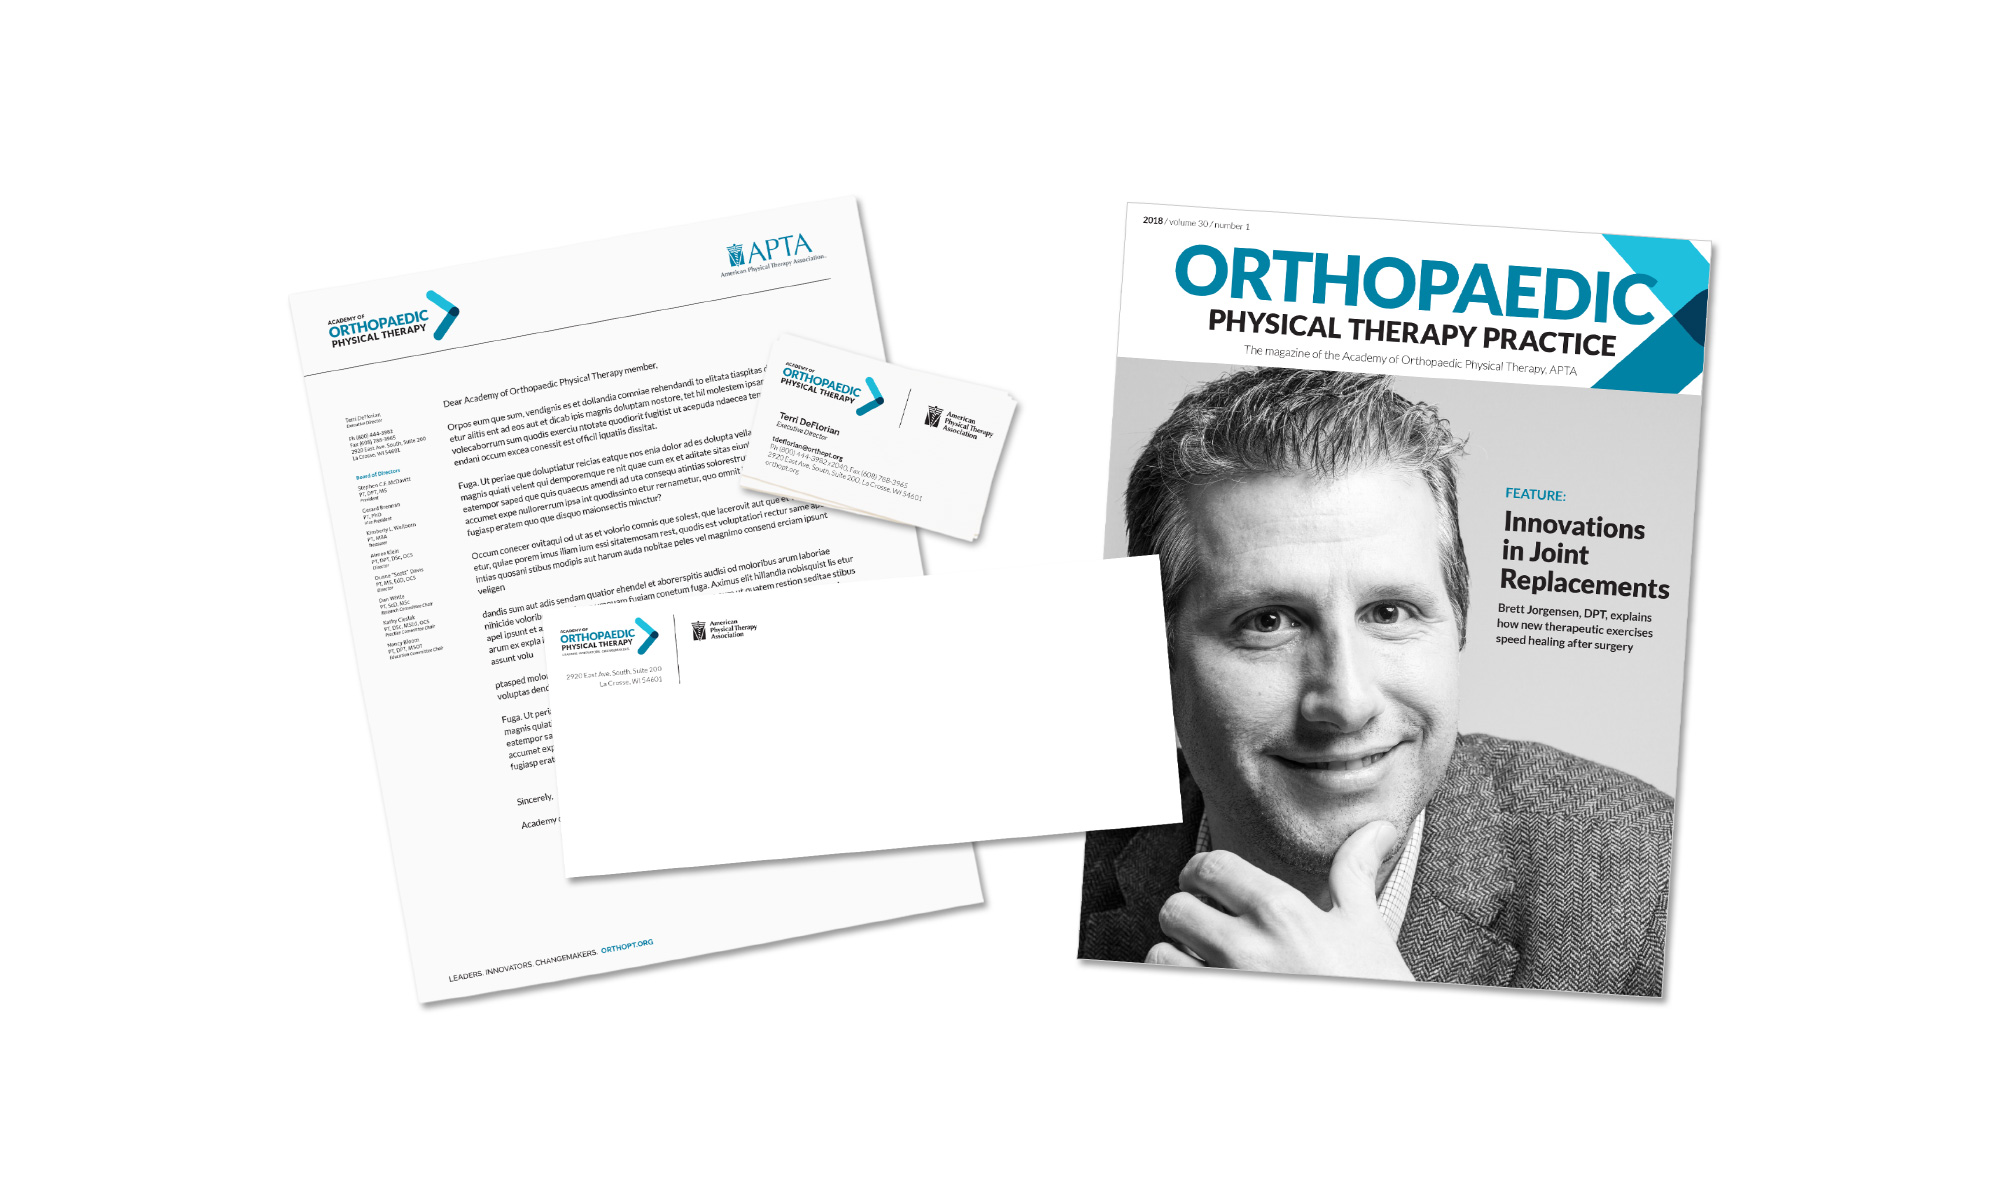 Academy of Orthopaedic Physical Therapy color letterhead, envelope, business card and magazine masthead created by Vendi